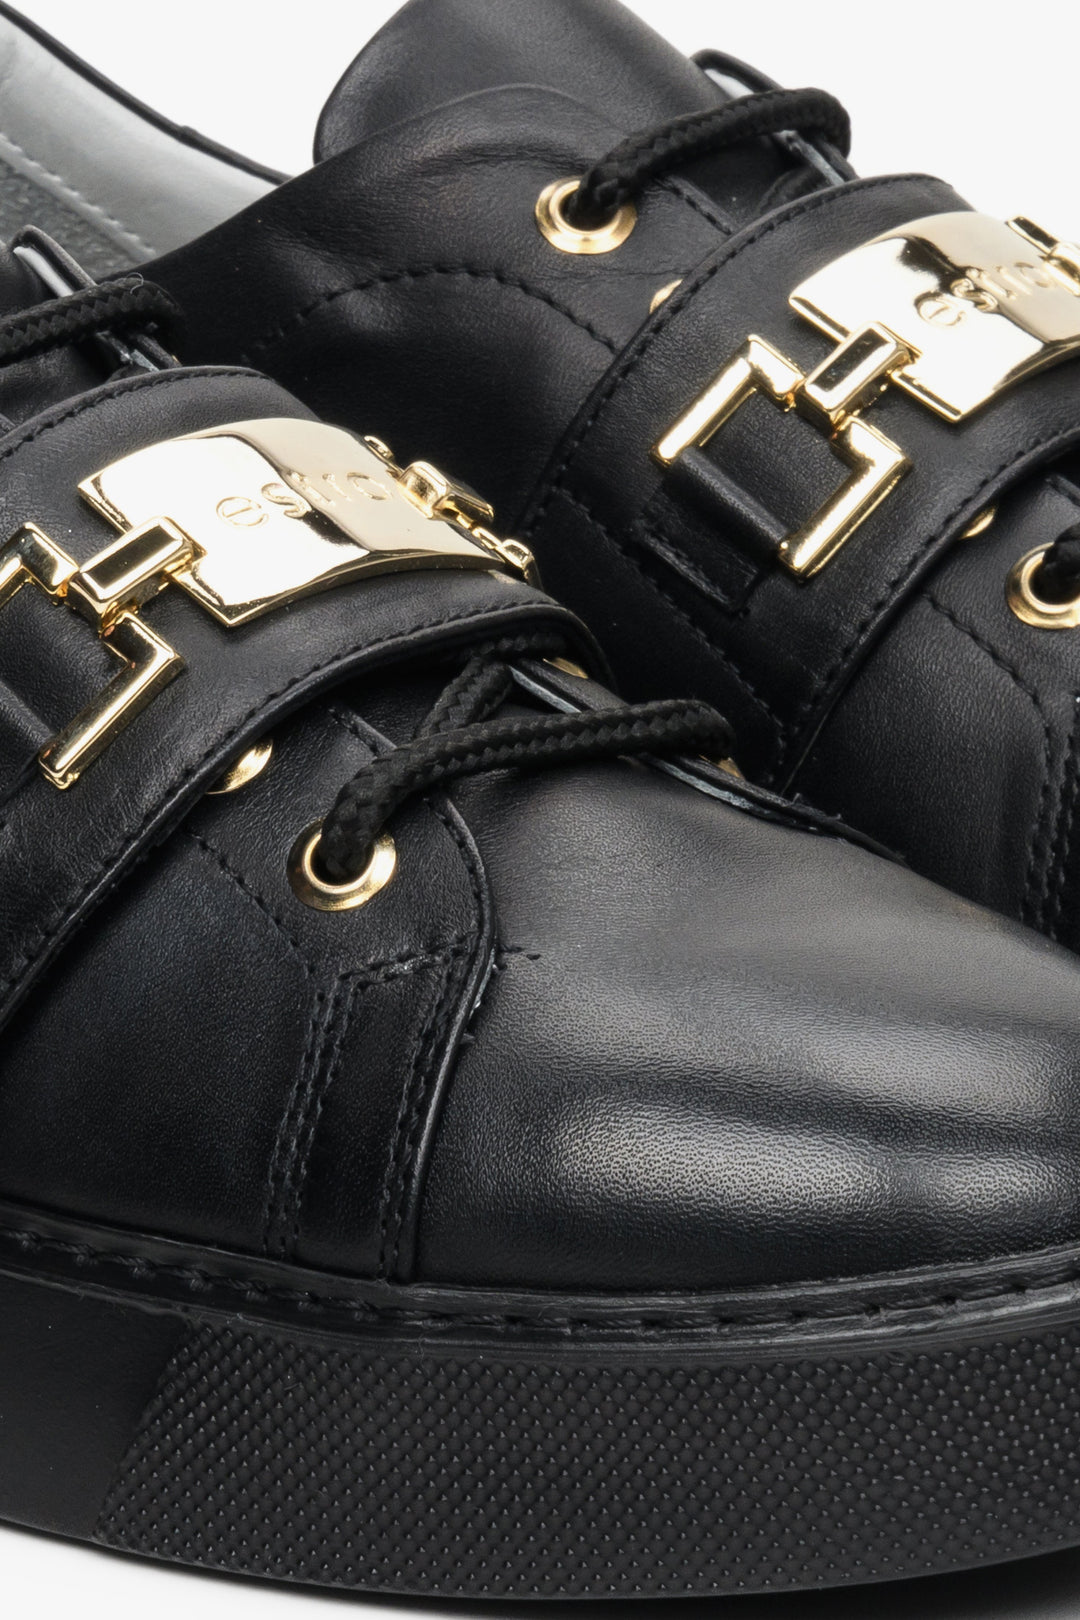 Women's black leather sneakers with a gold embellishment - close-up on the details.